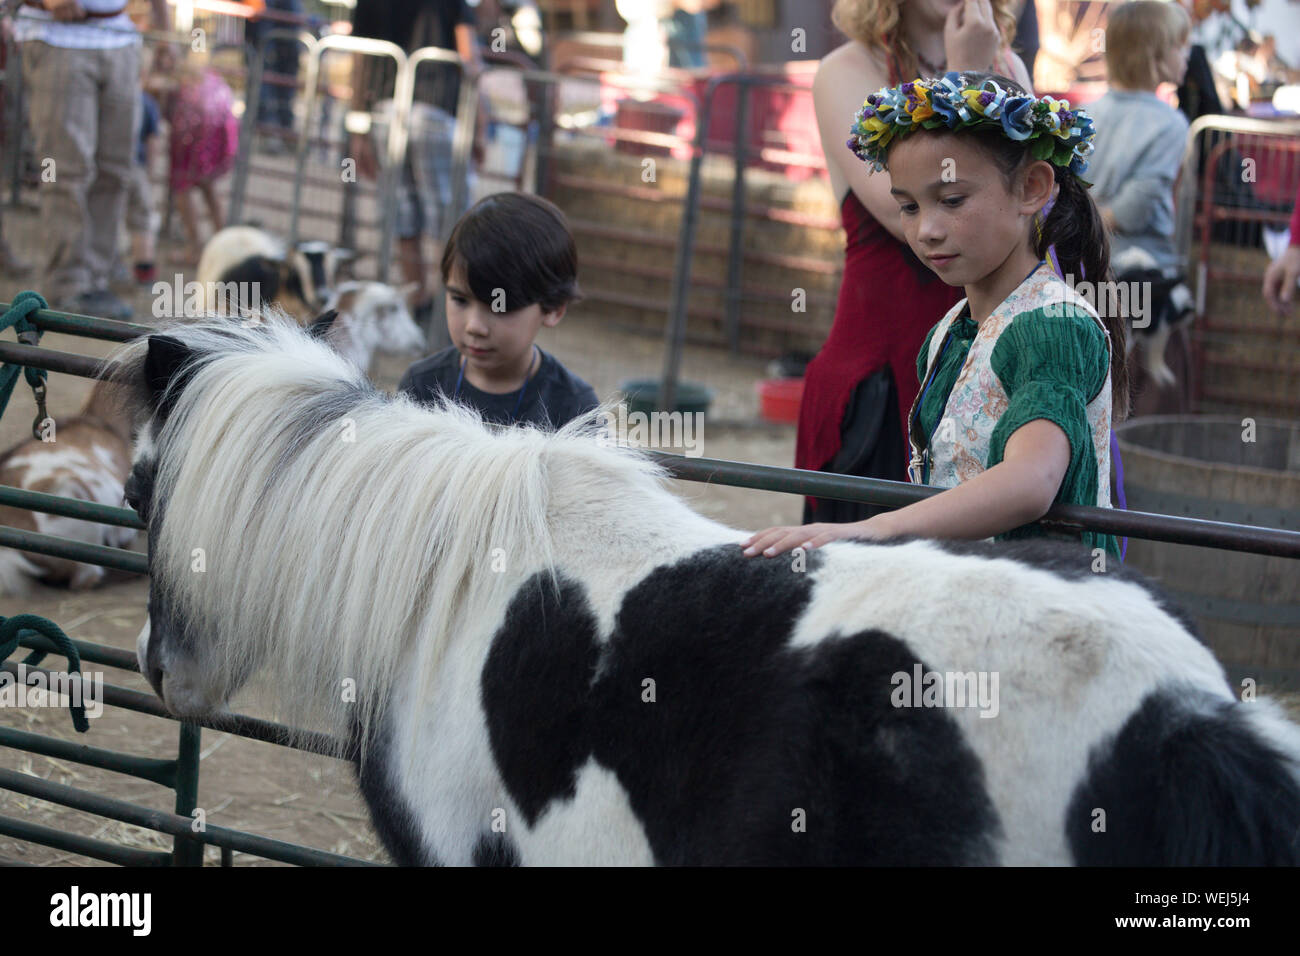 Brother and sister 5-6 years old and 9 years old of Asian appearance at petting zoo with pony, Gilroy, California Stock Photo